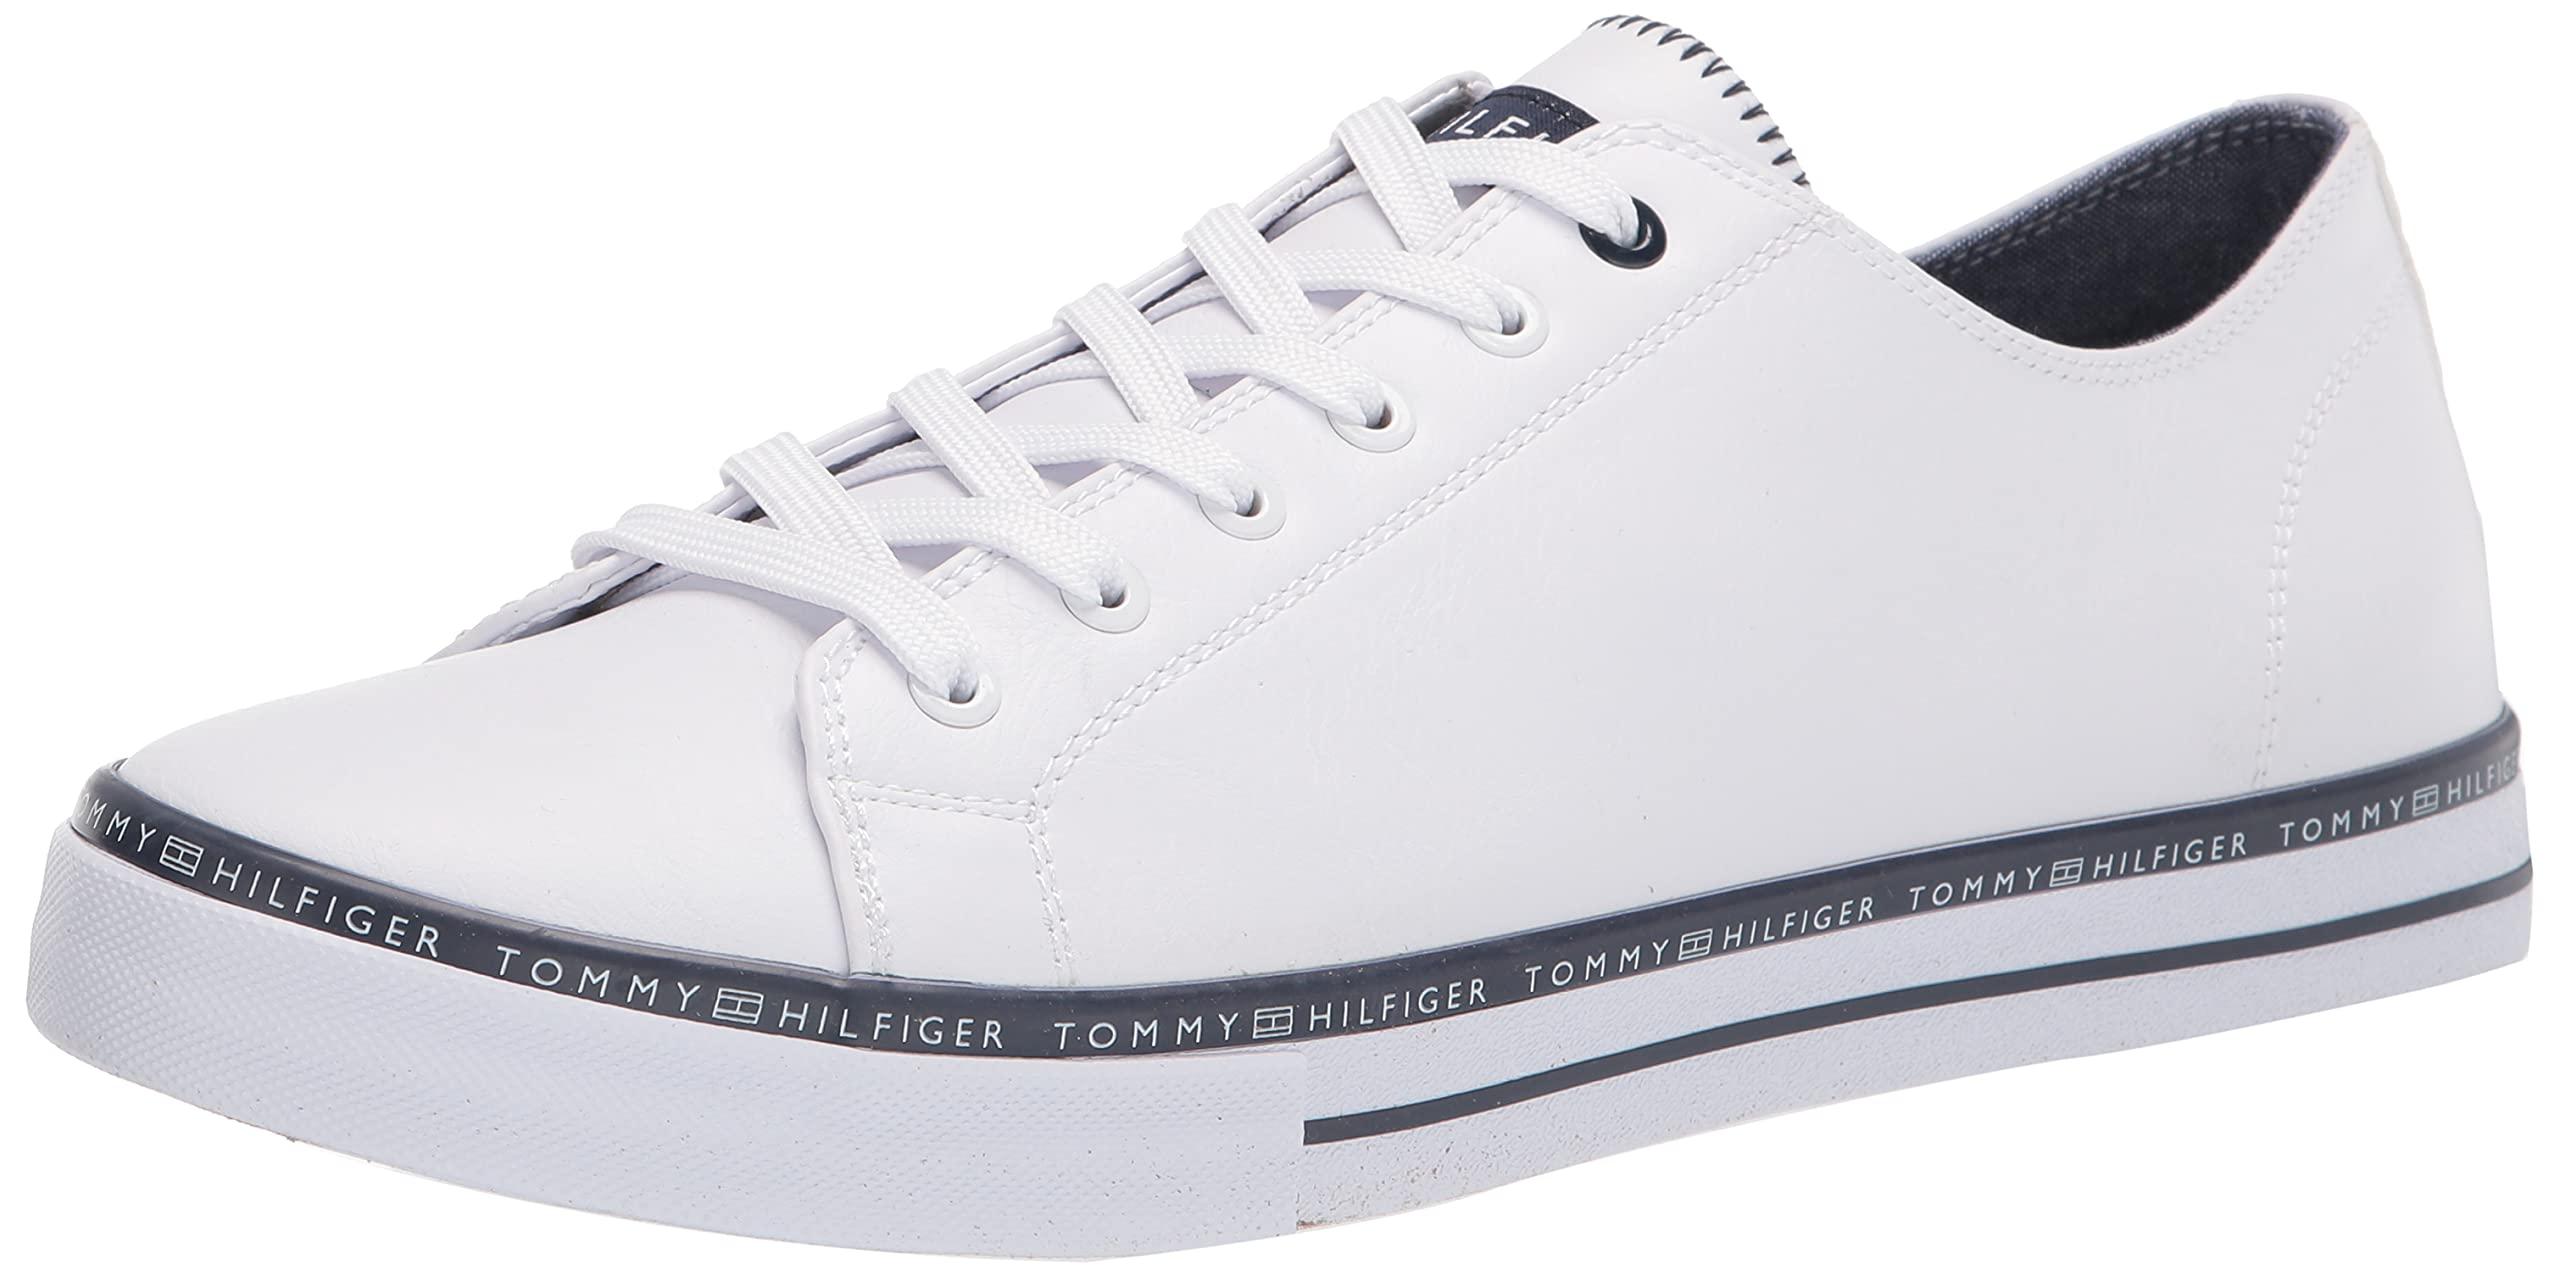 Tommy Hilfiger Raph 2 in White for Men - Save 8% - Lyst